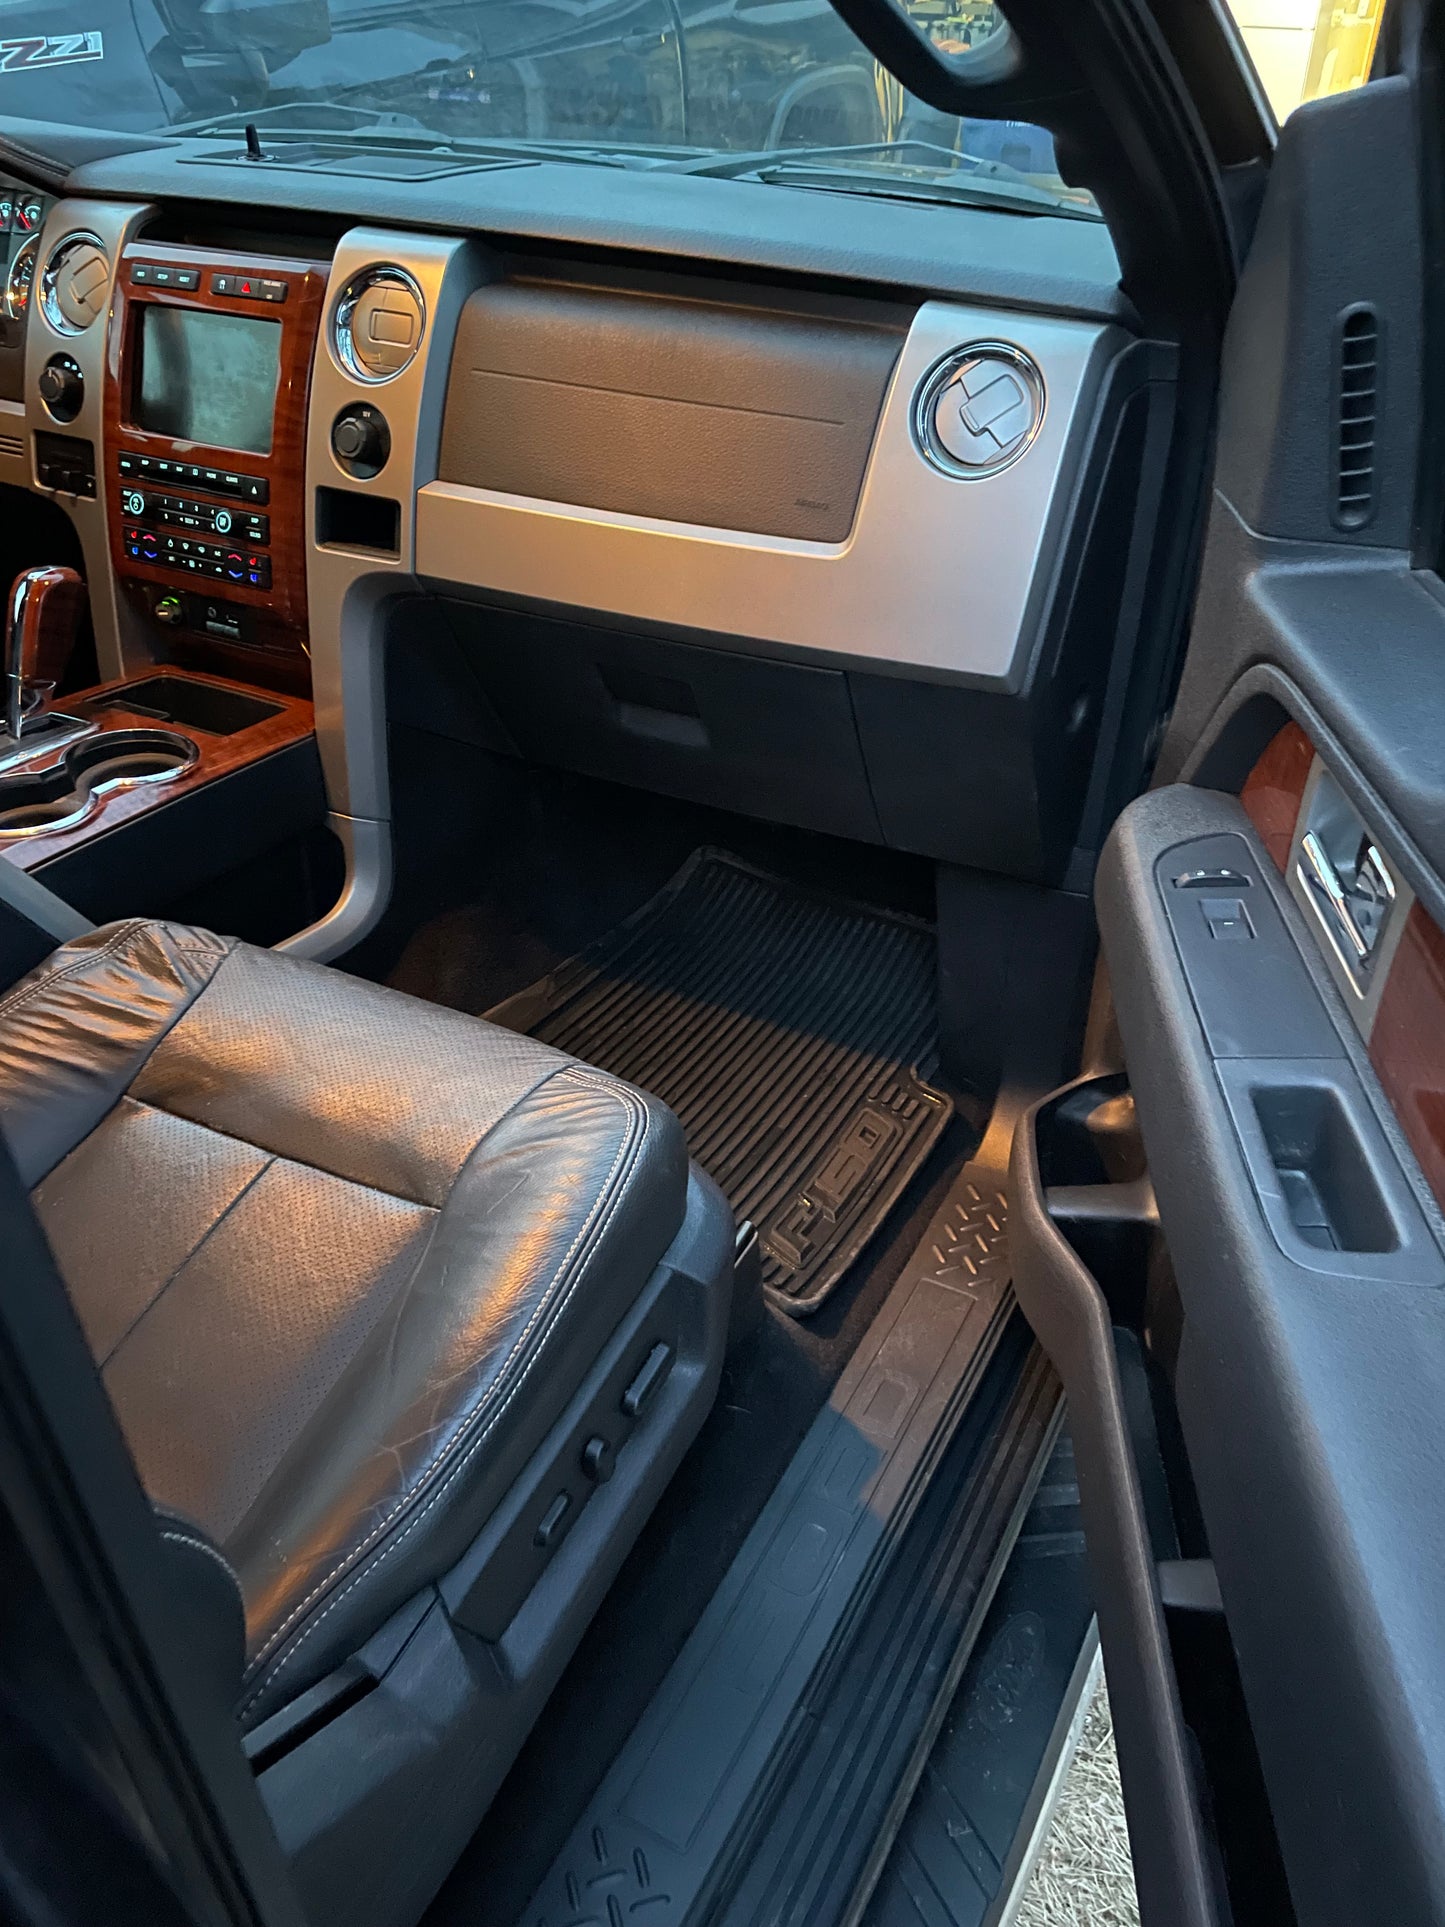 Truck/Large SUV (interior detail) (3-5 hours)